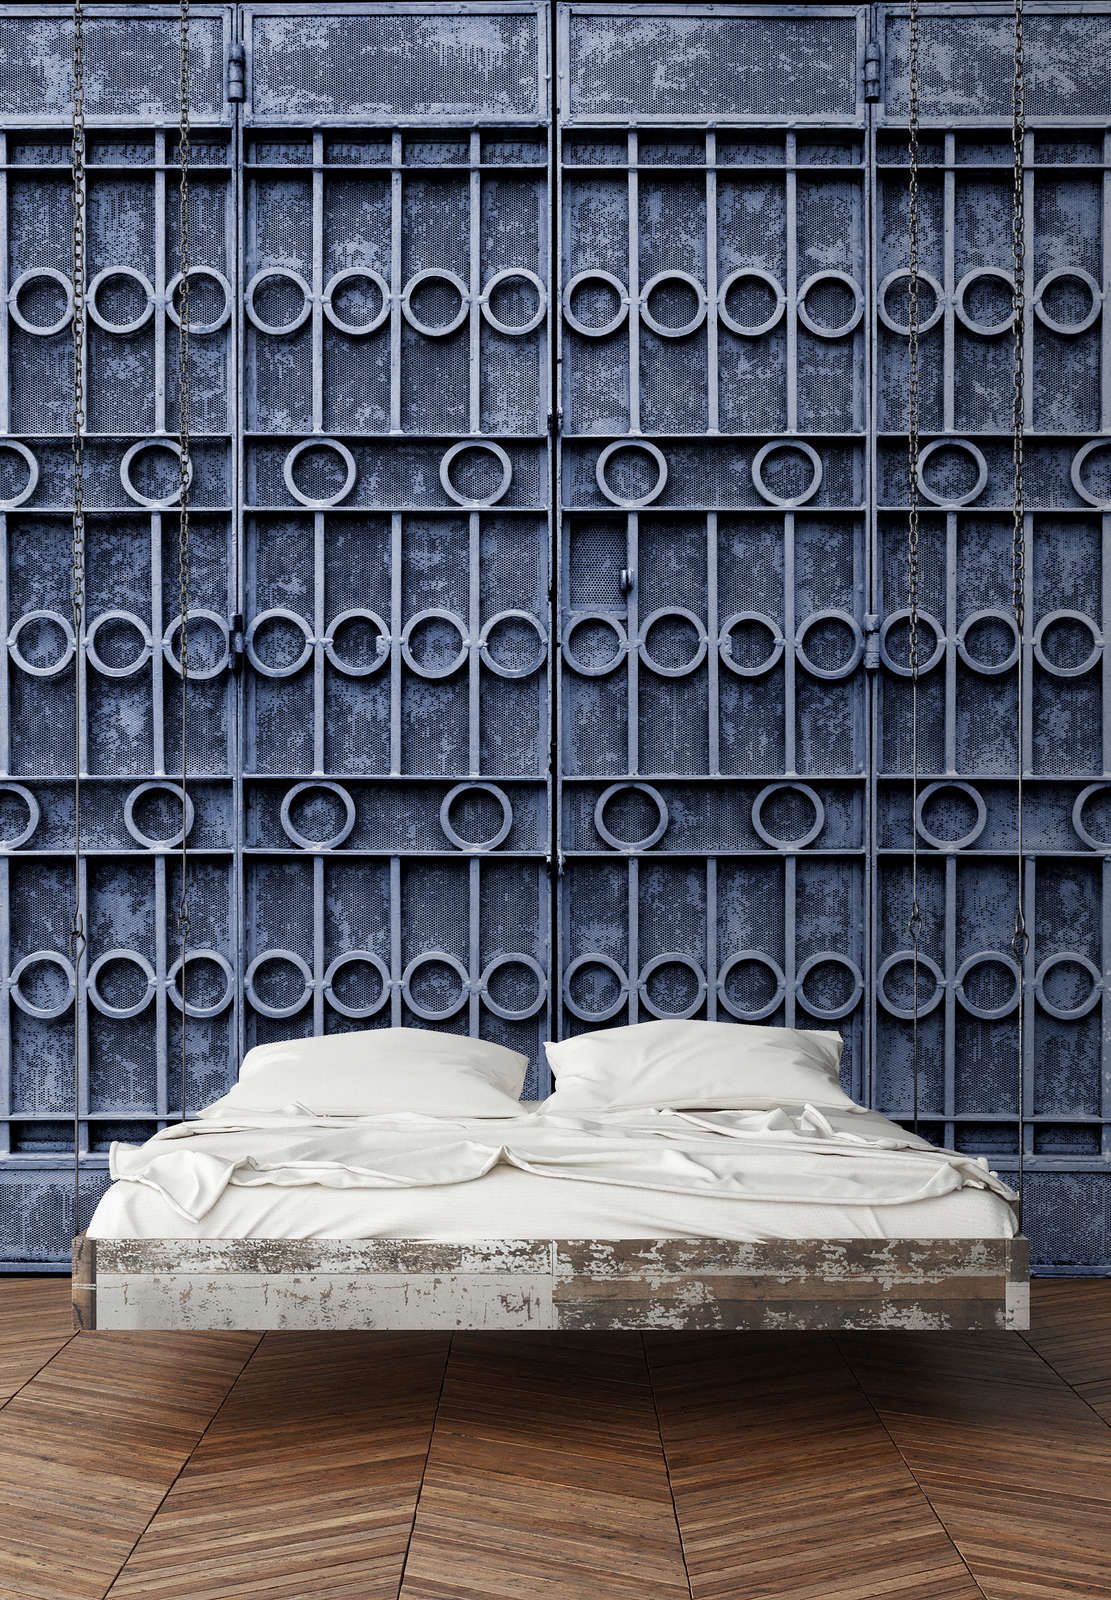             Photo wallpaper »jodhpur« - Close-up of a blue metal fence - Smooth, slightly shiny premium non-woven fabric
        